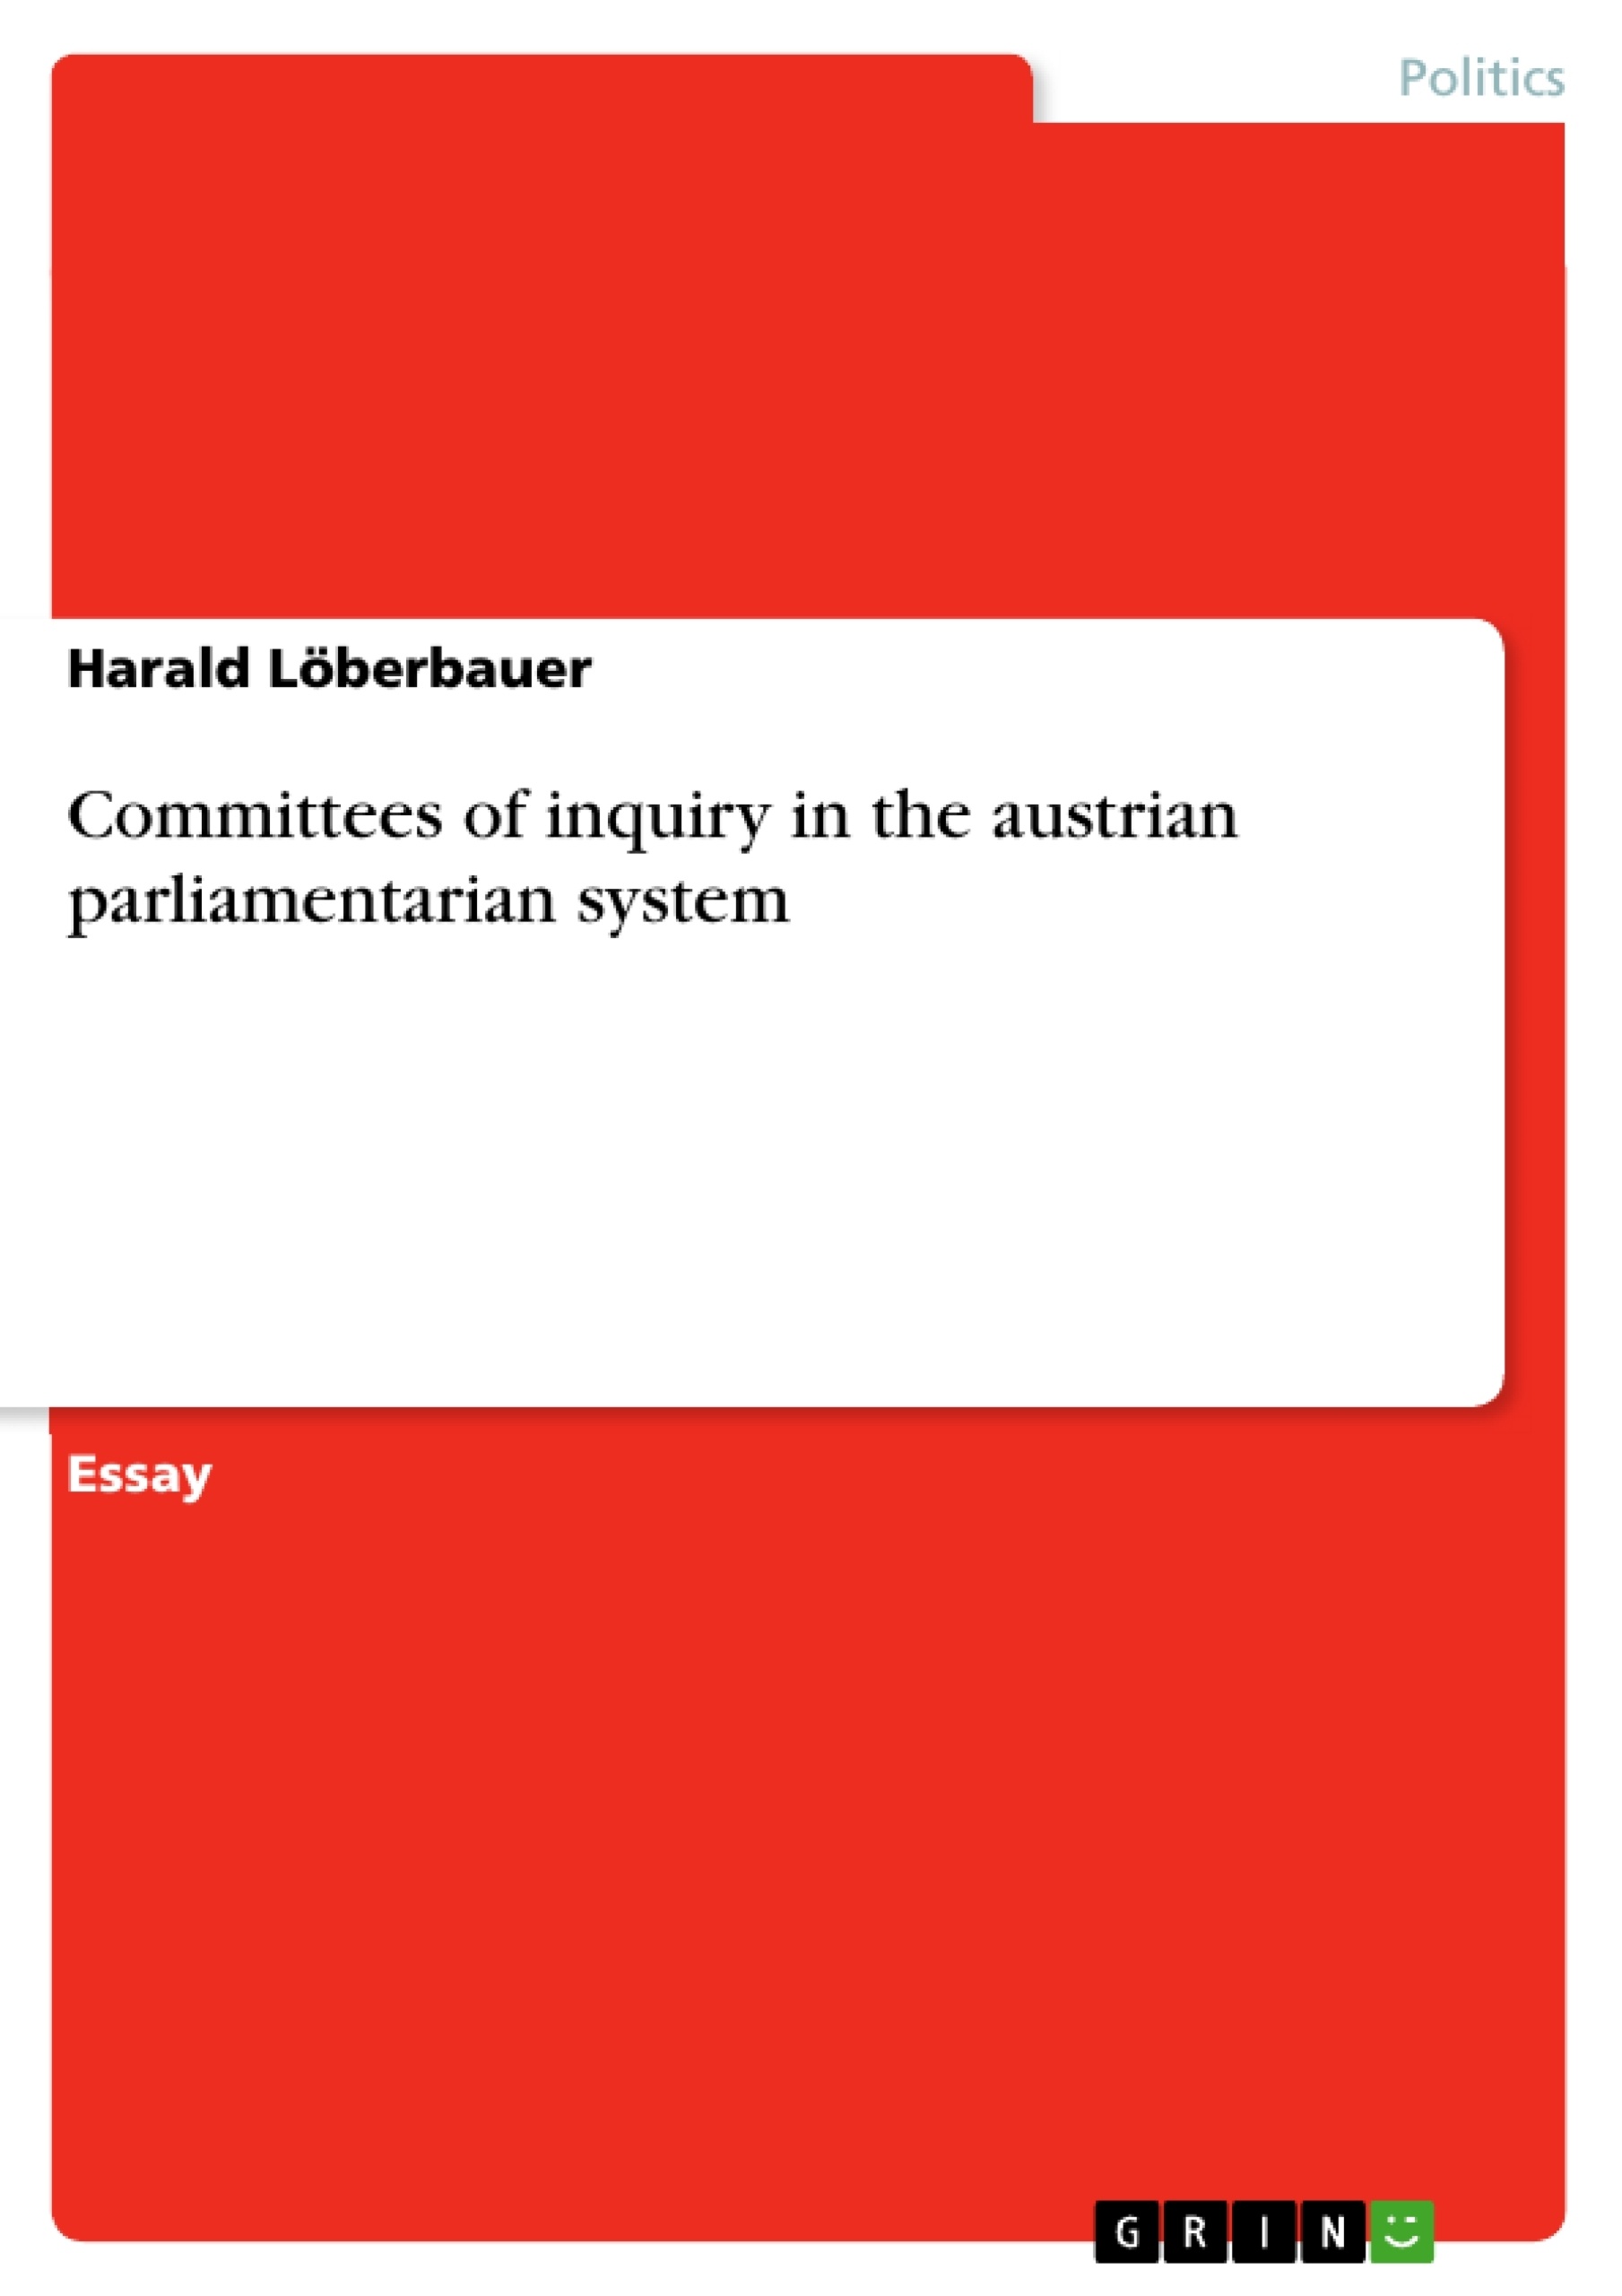 Titre: Committees of inquiry in the austrian parliamentarian system